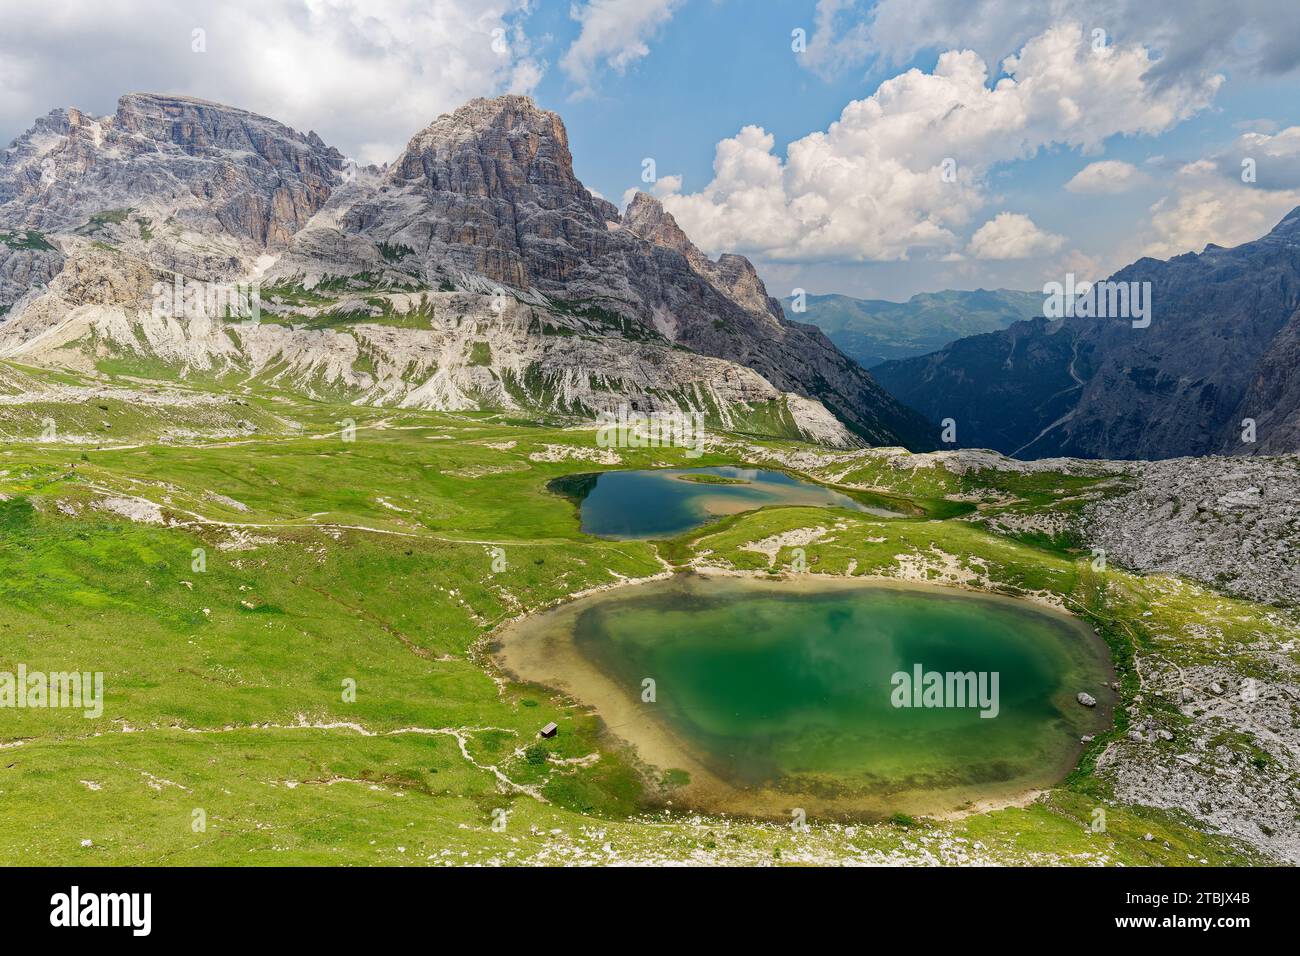 View of Laghi dei Piani near Tre Cime di Lavaredo, in the Dolomites, Italy. Beautiful and famous landscape for hikers and mountaineers. Amazing lakes. Stock Photo